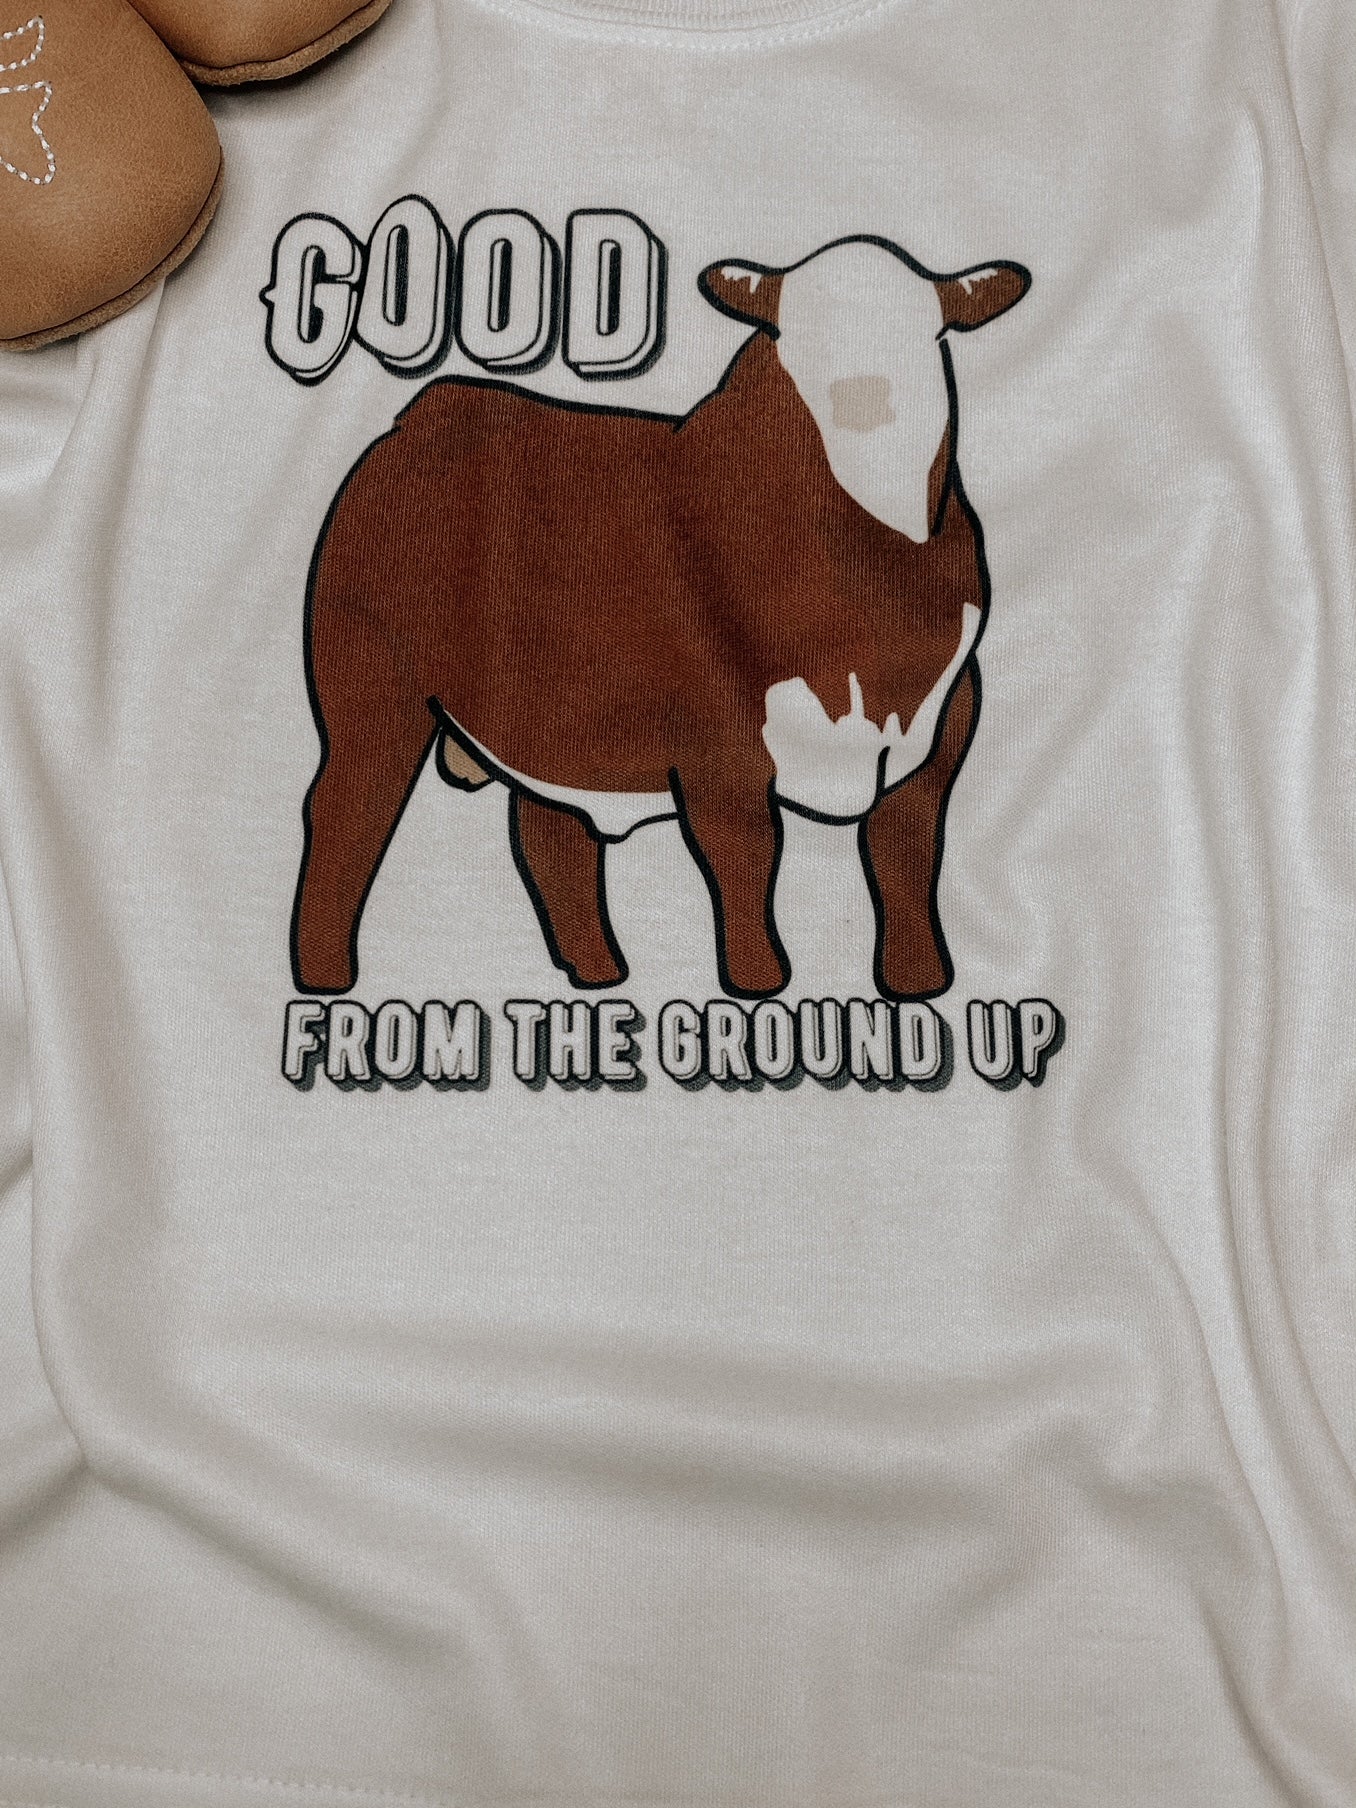 the Good from the |Ground| Up onesie + tee